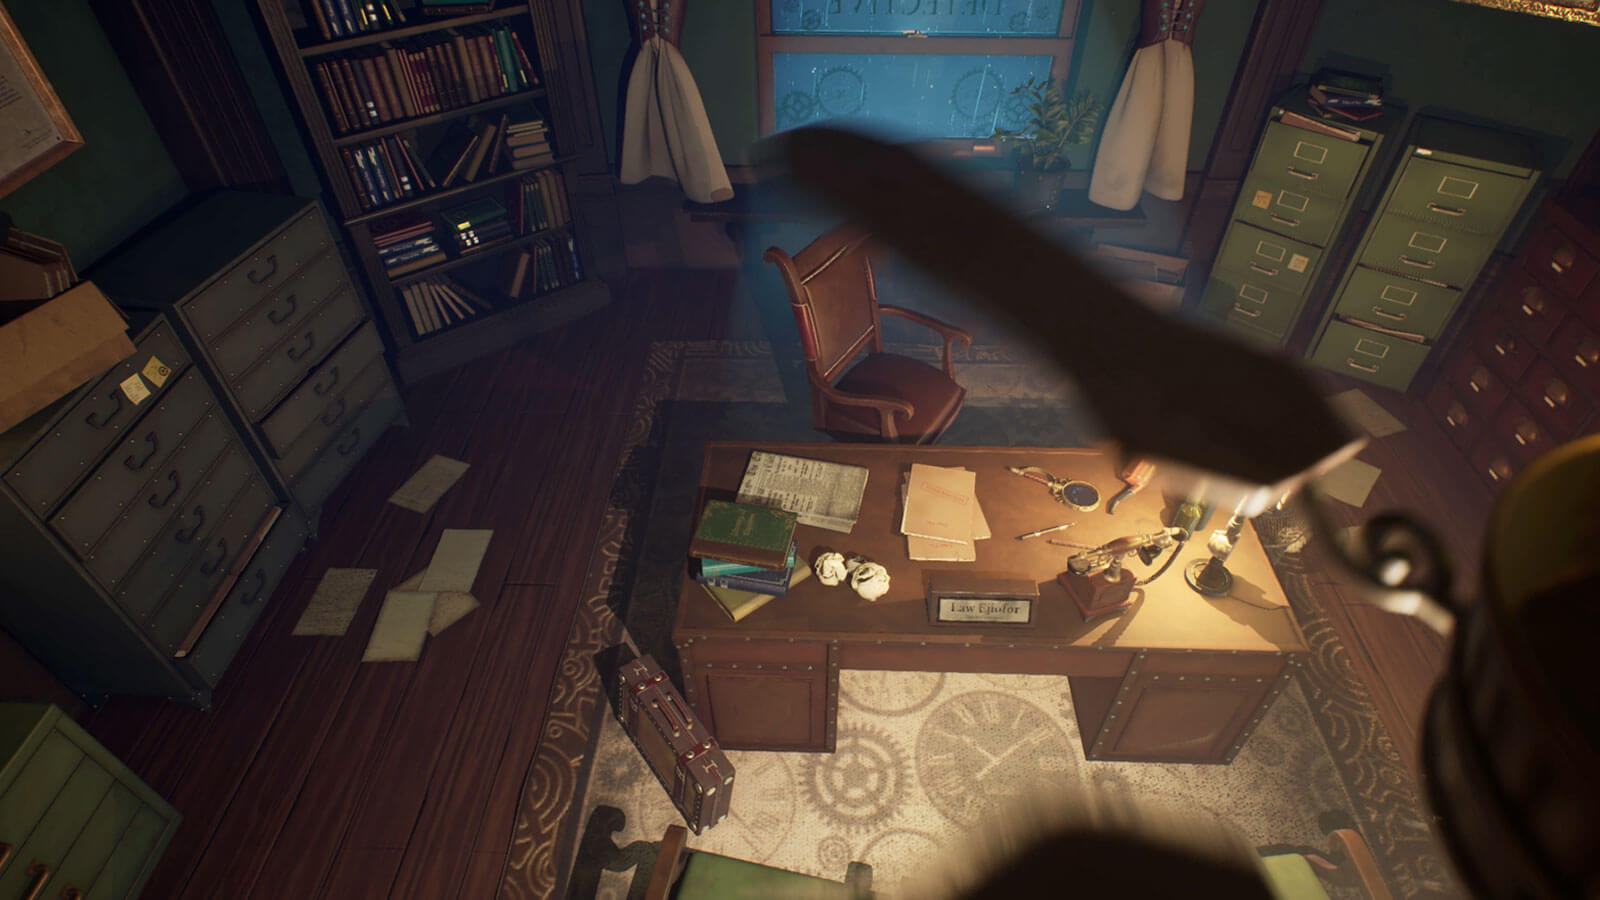 Overhead view through a ceiling fan of a detective's desk